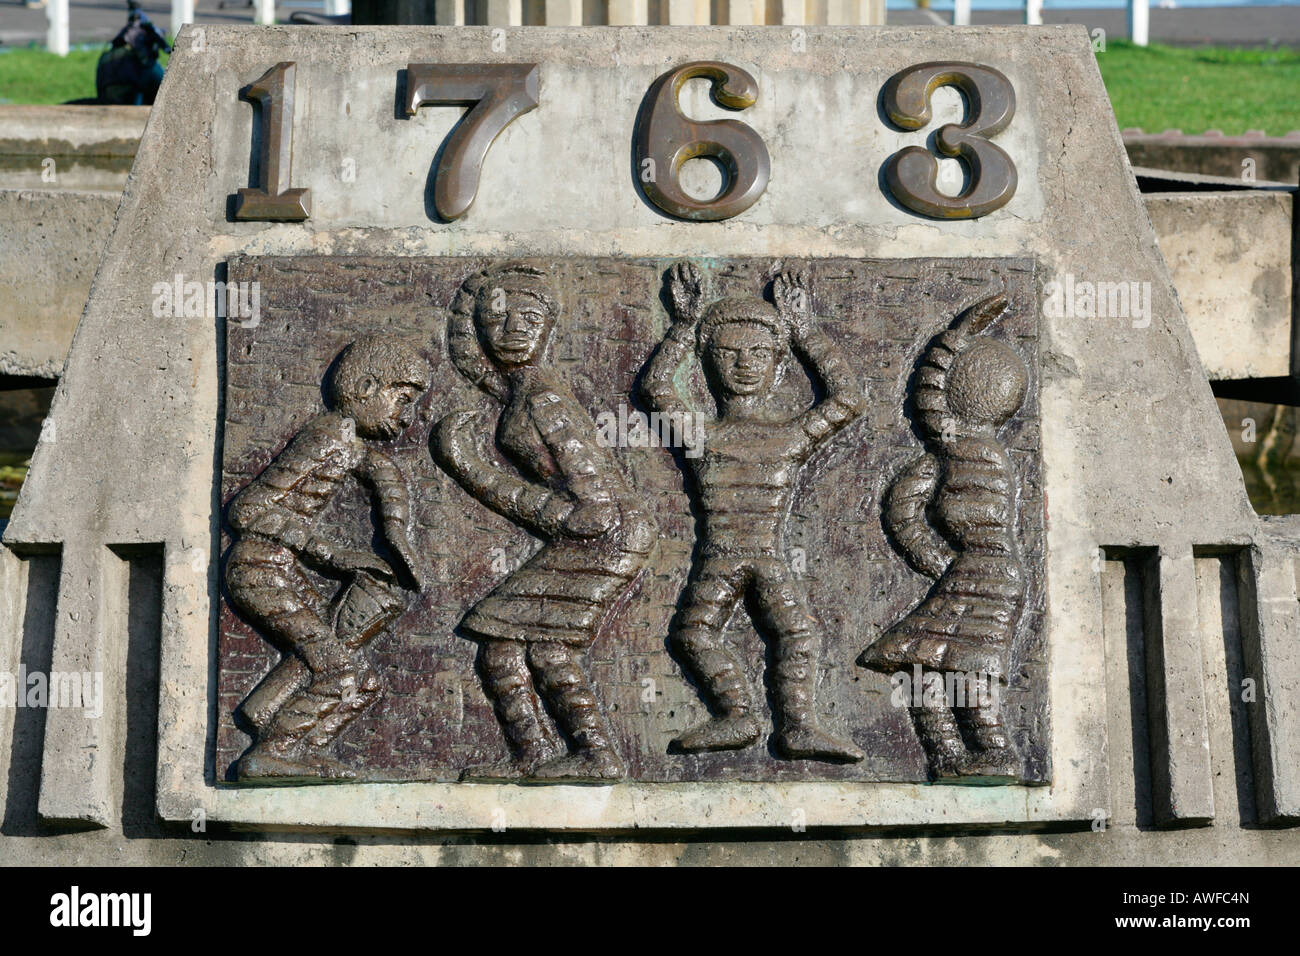 Memorial for the 1763 slave rebellion in Georgetown, Guyana, South America Stock Photo